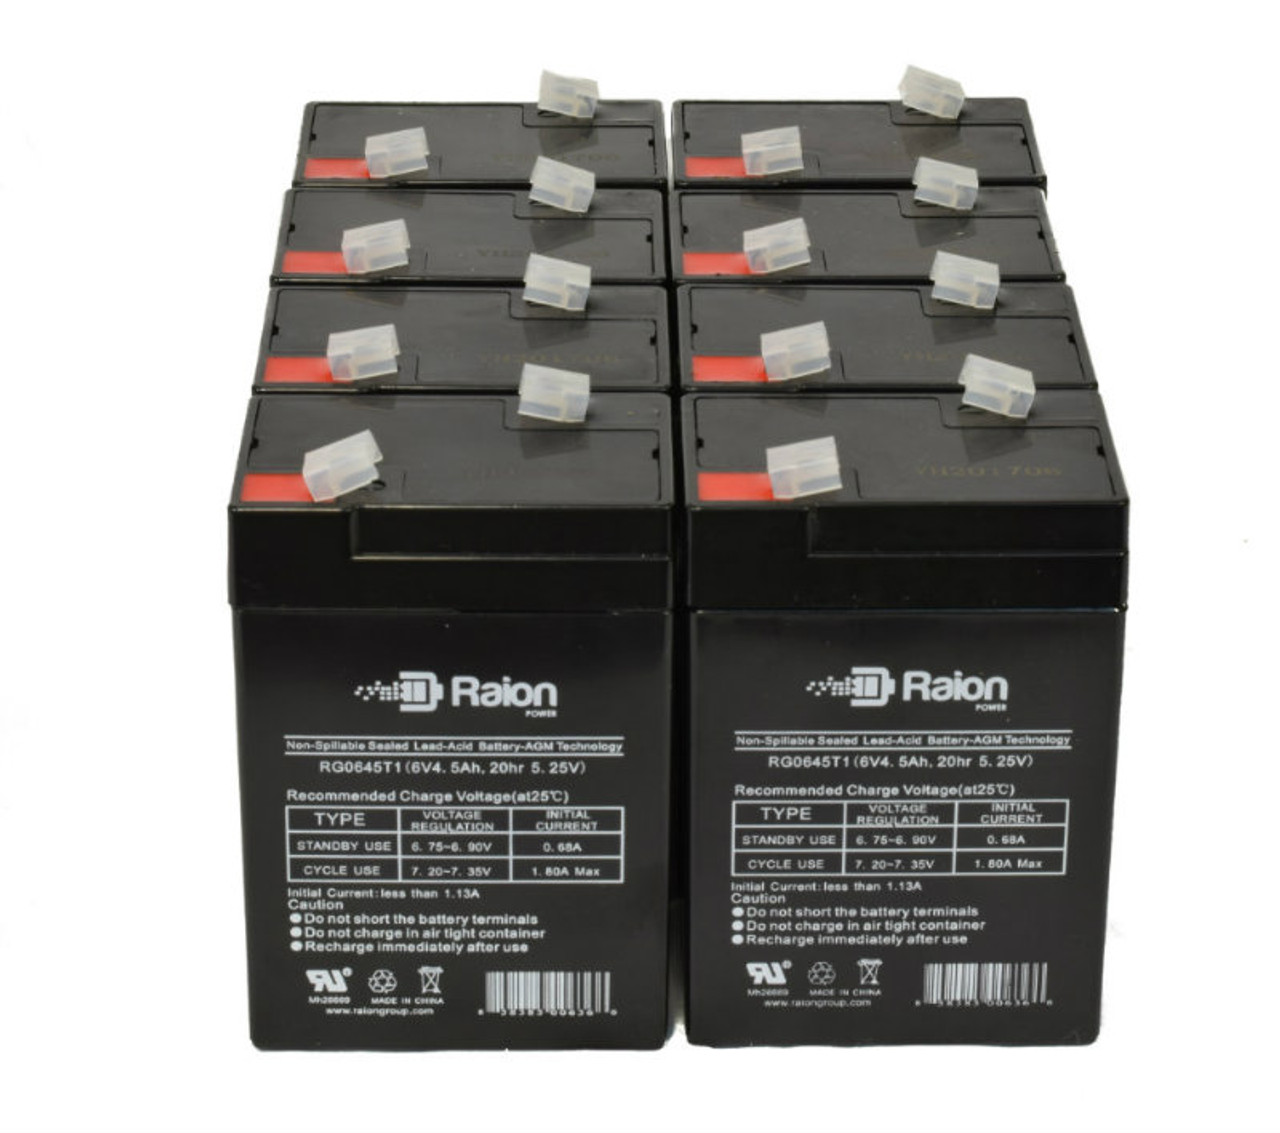 Raion Power RG0645T1 6V 4.5Ah Replacement Medical Equipment Battery for Cambridge Med Instruments Model 502 - 8 Pack